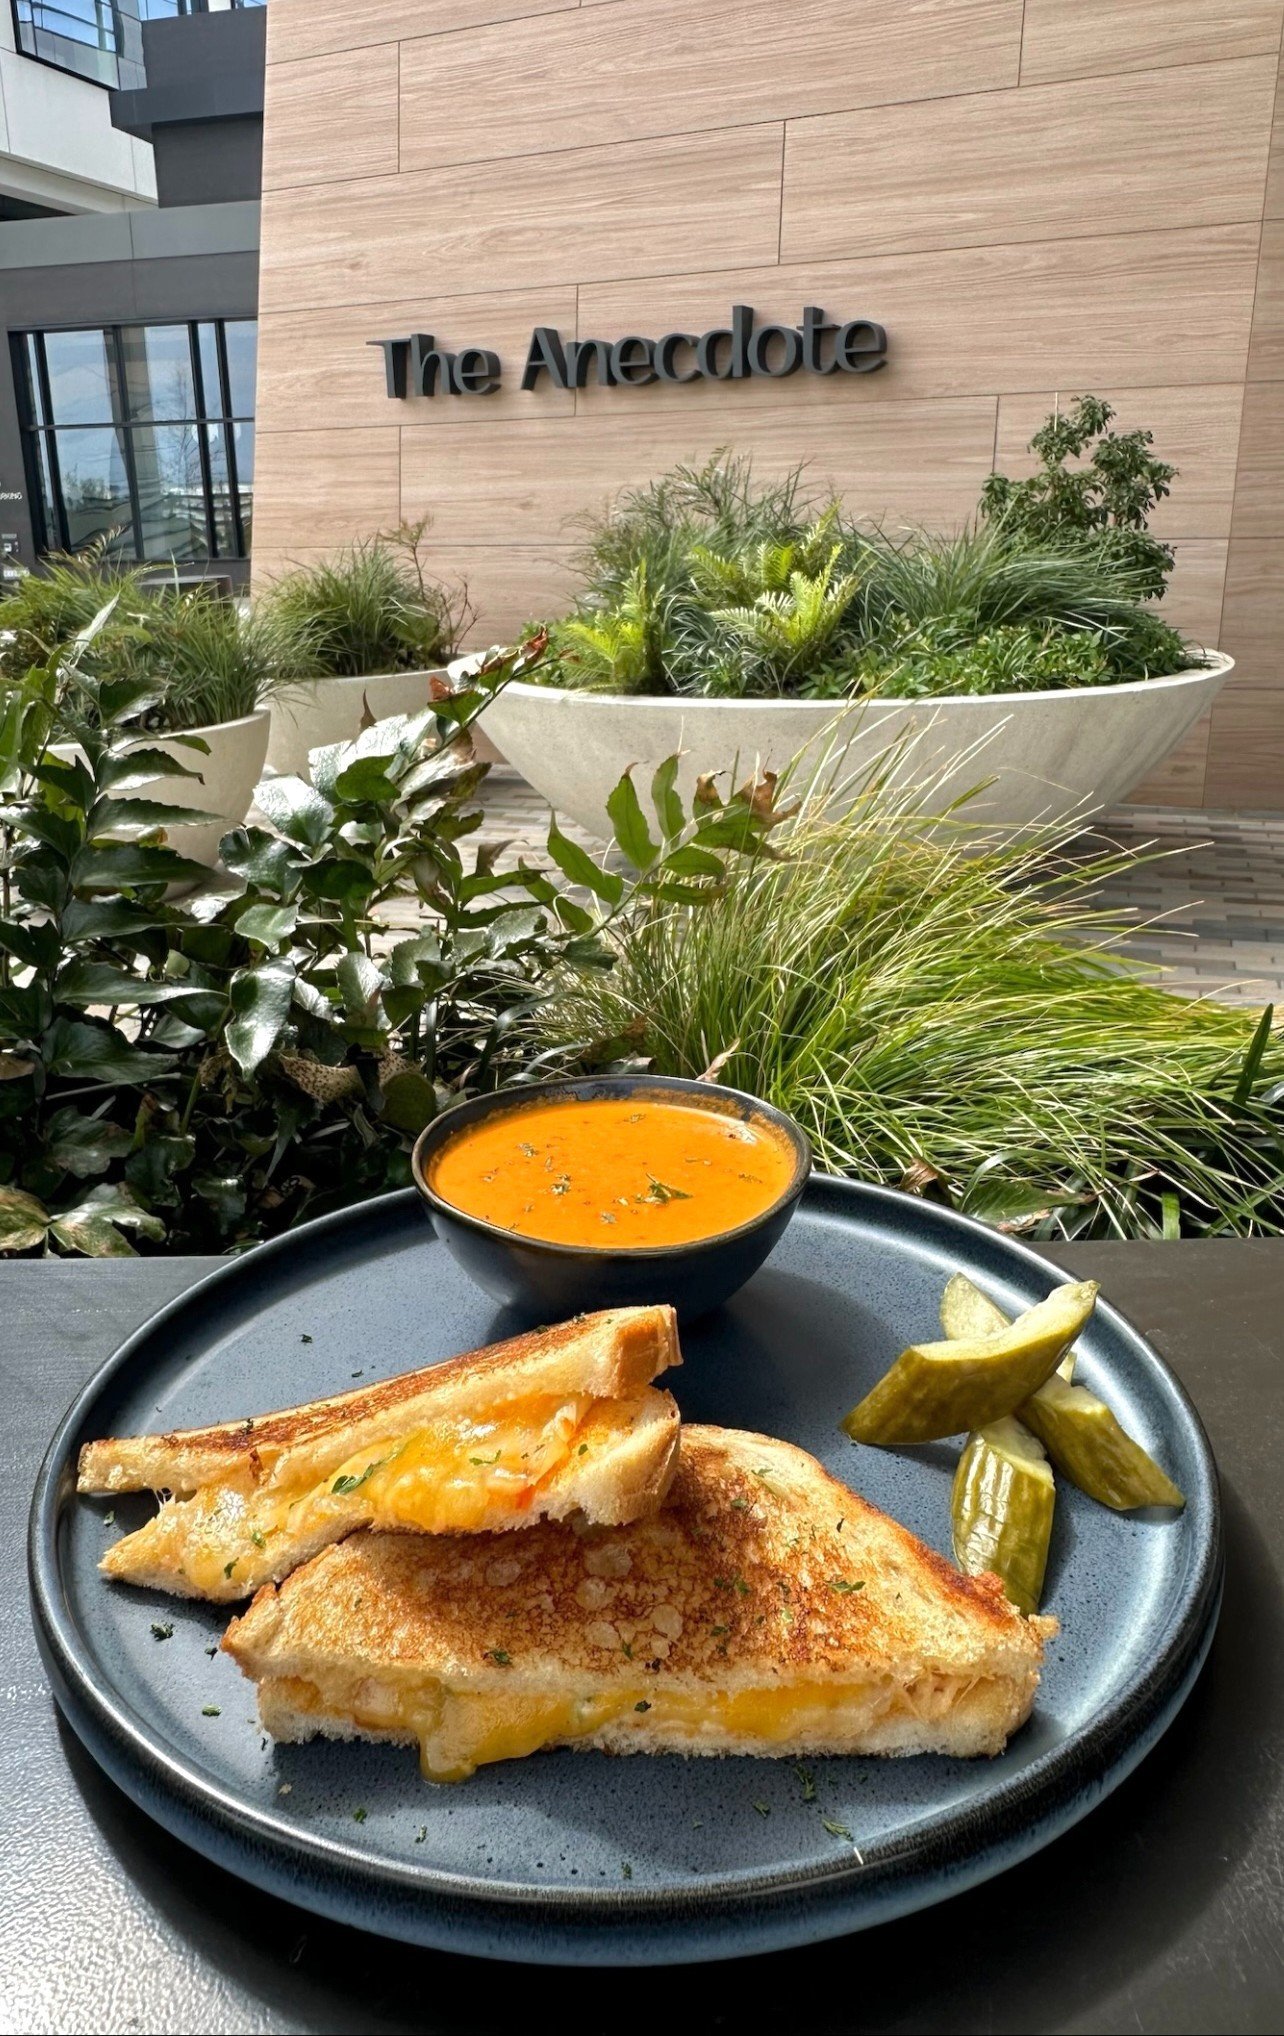 Name a better duo.... I'll wait 😍😋
Grilled cheese sandwich with tomato soup 🤩

#grilledcheese #sandwich  #tomatosoup #oysterpoint #views #southsanfrancisco #sanfrancisco #outdoorseating #marinaviews #sffoodie #sfeats #bayareafoodie #bayarea #bayar